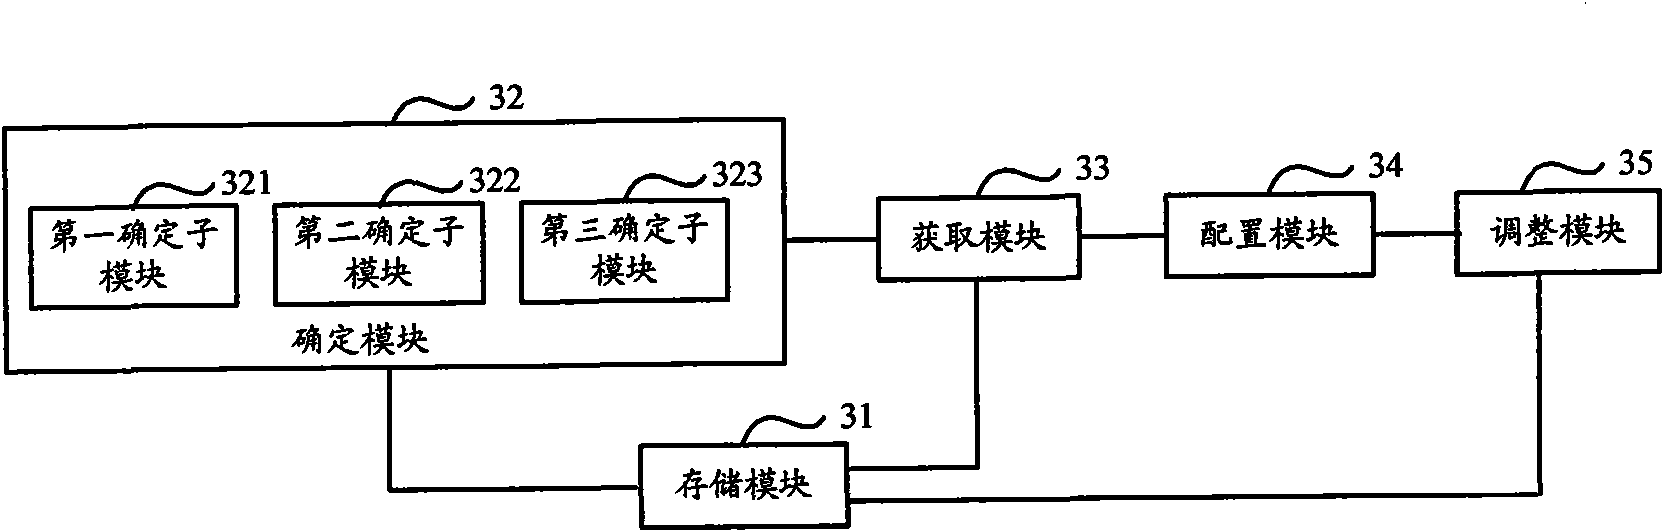 Method and system for optimizing network